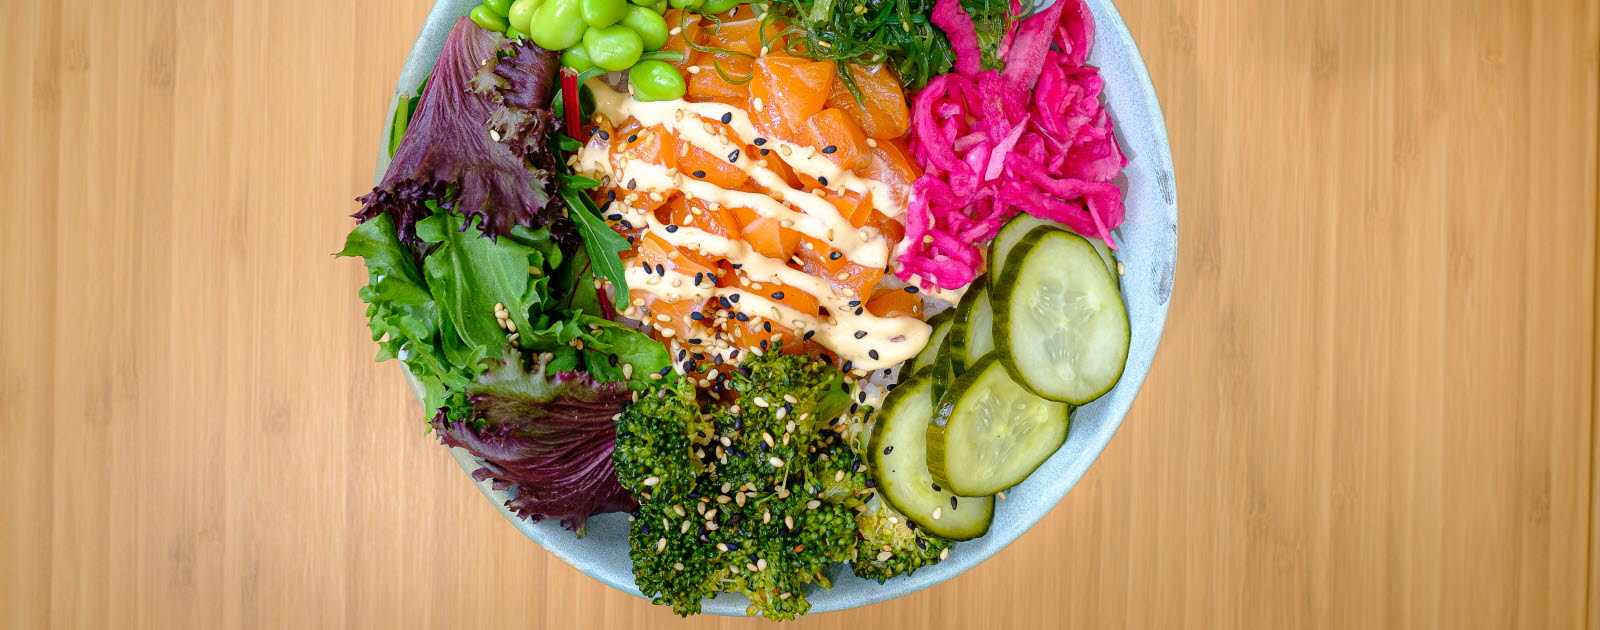 Bowl with broccoli, salad, edamame beans, cucumber, pickled onion, seaweed and salmon.